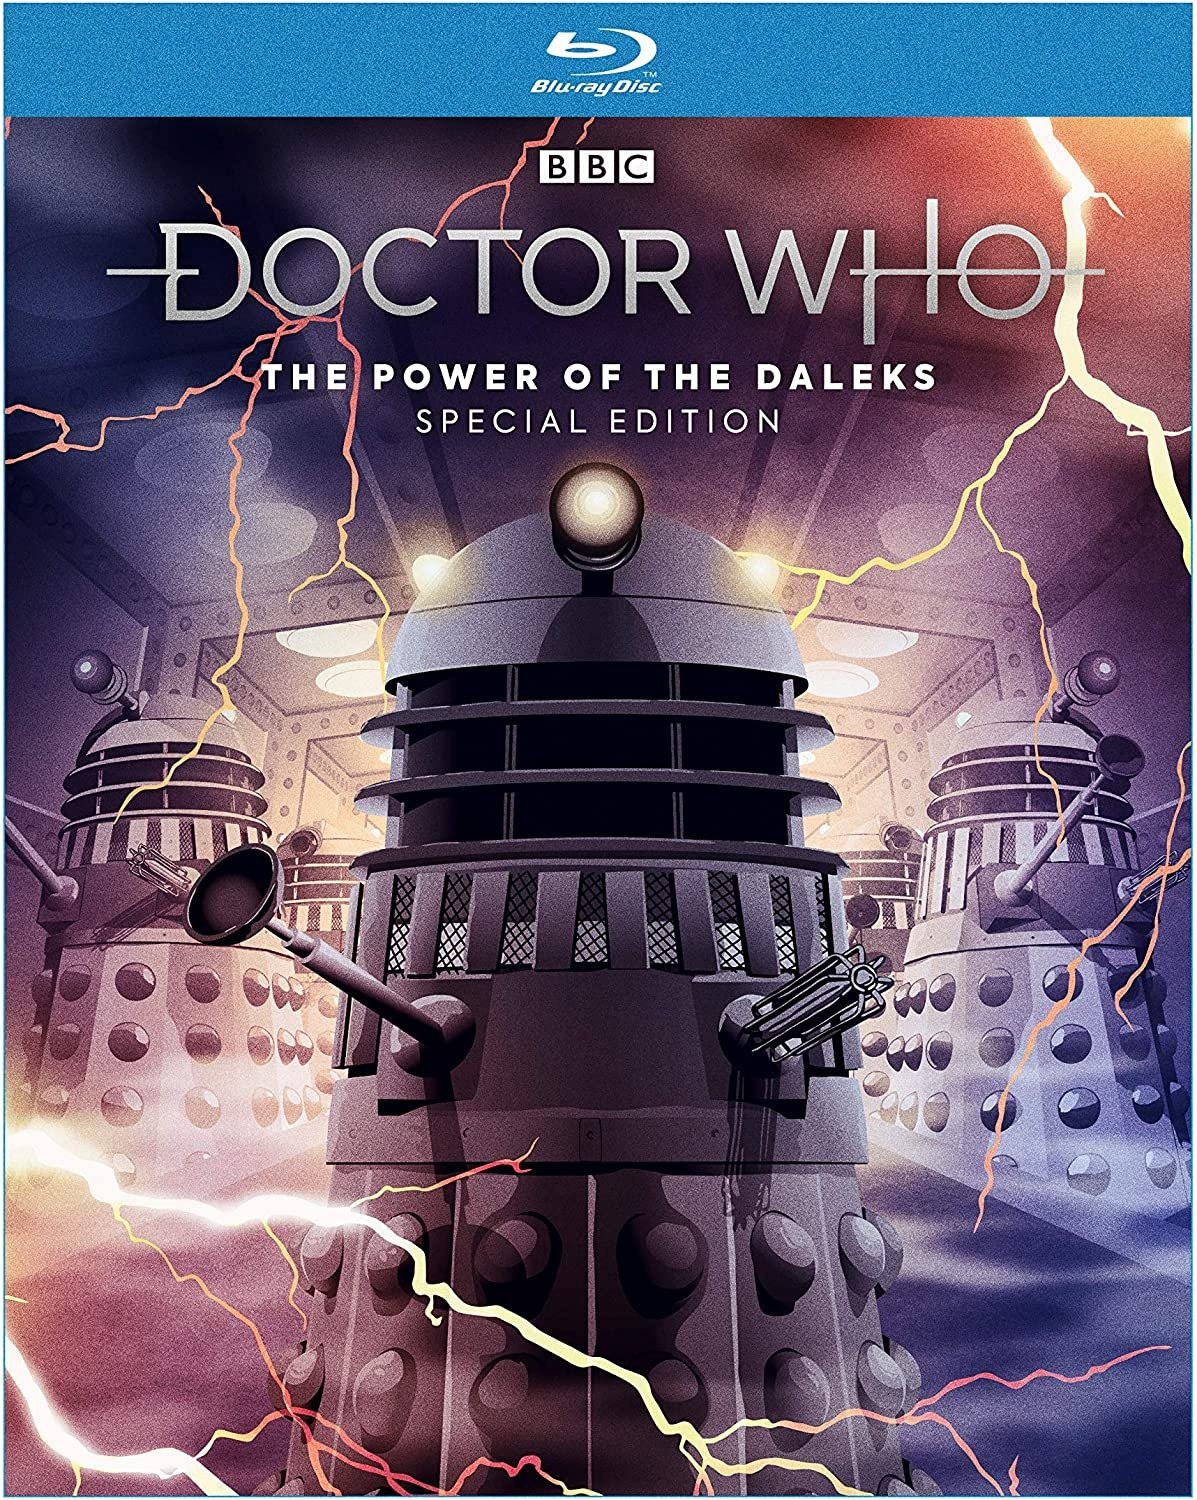 The Power of the Daleks Gets Special Edition Blu-ray Release with New Additional Features